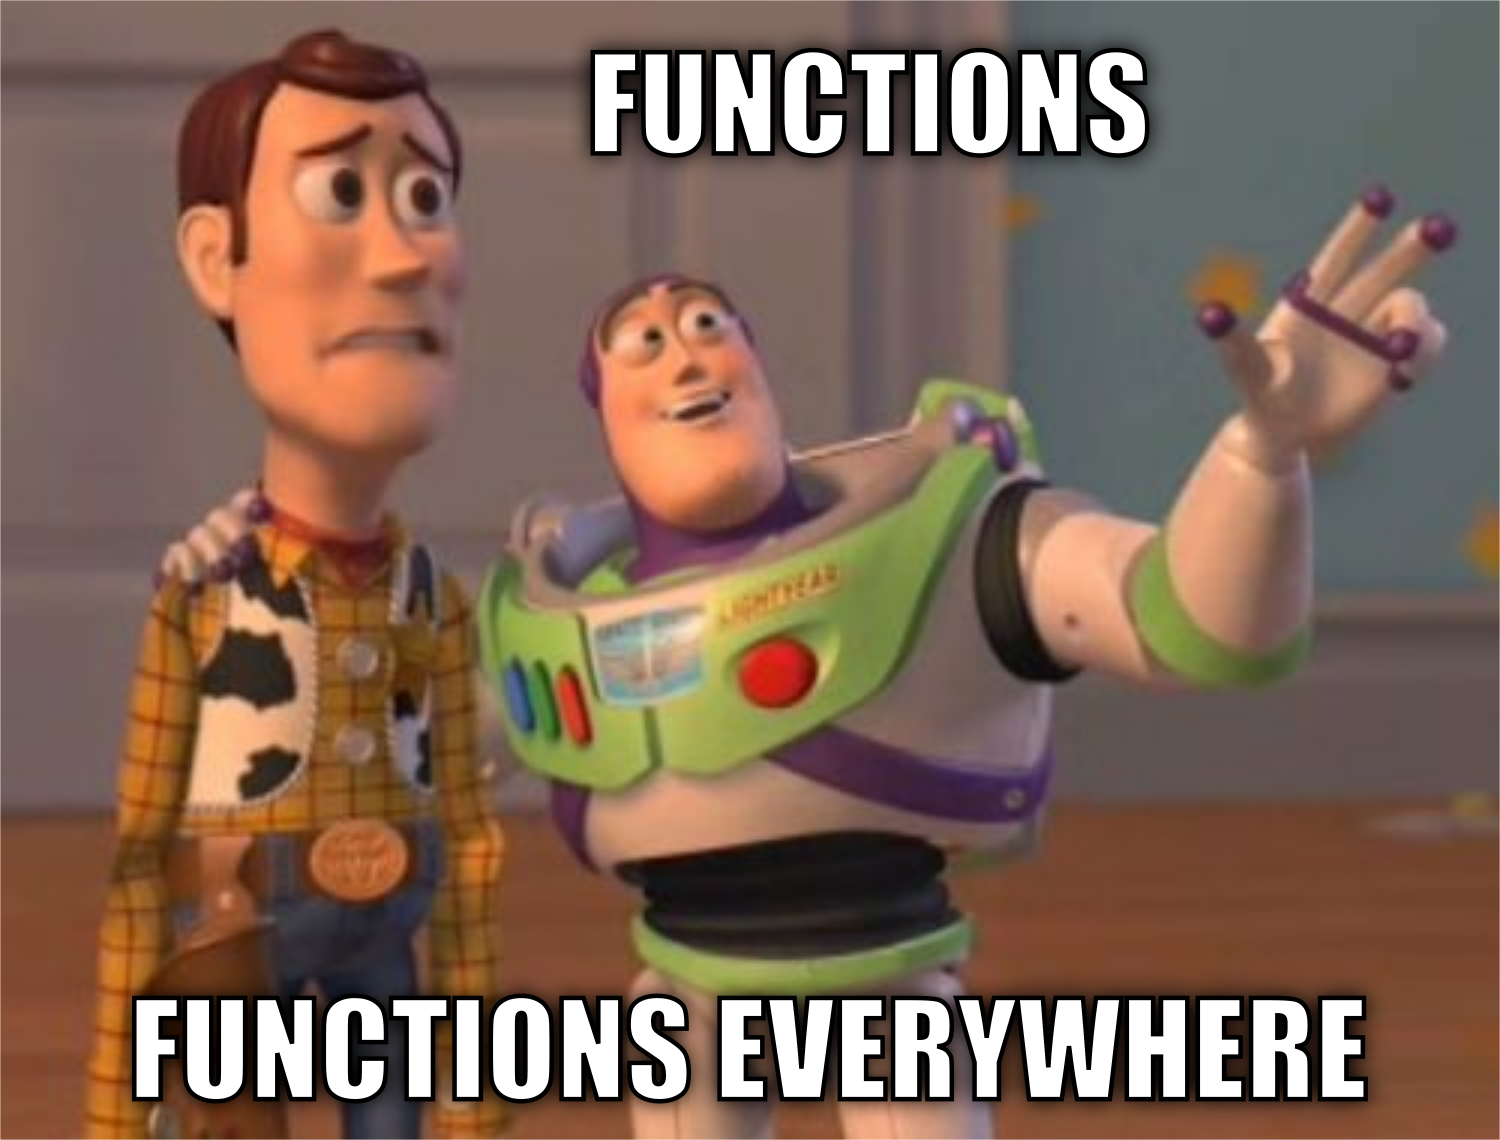 Simple functions.